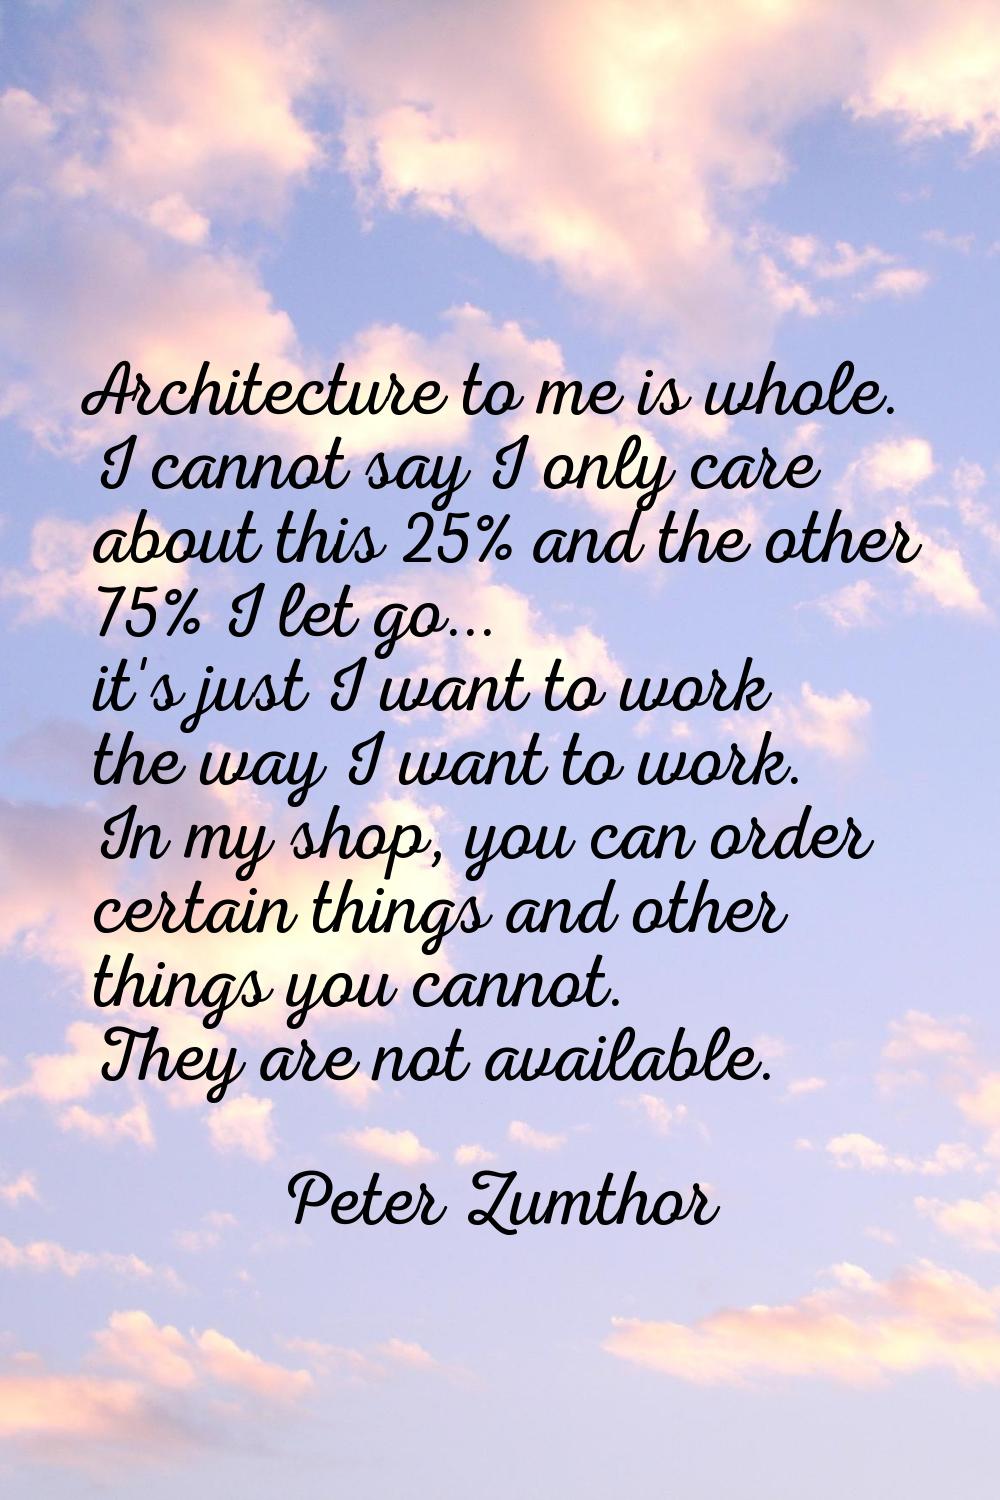 Architecture to me is whole. I cannot say I only care about this 25% and the other 75% I let go... 